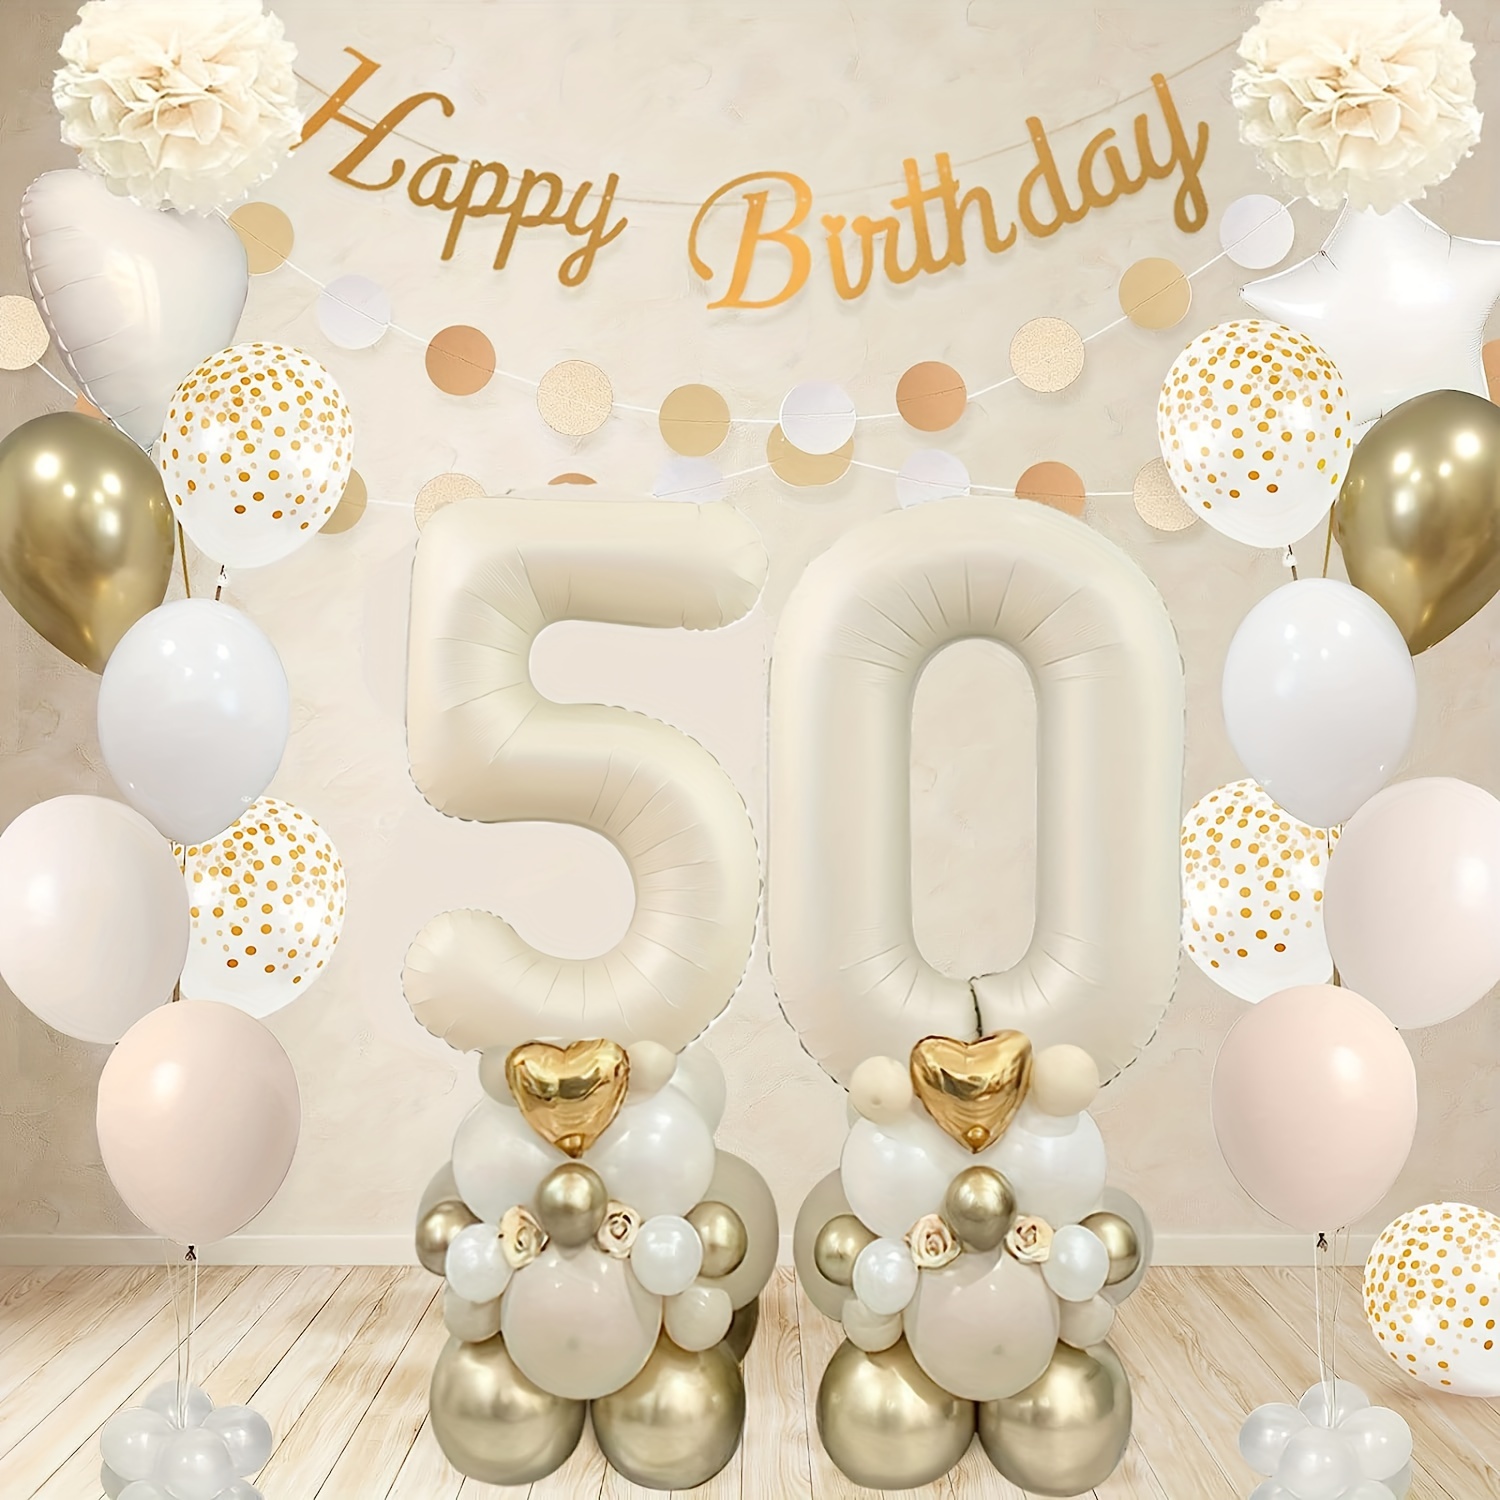 50th Birthday Decorations for Women Rose Gold Happy 50th Birthday Banner 50  Balloon Number 50th Birthday Party Decorations